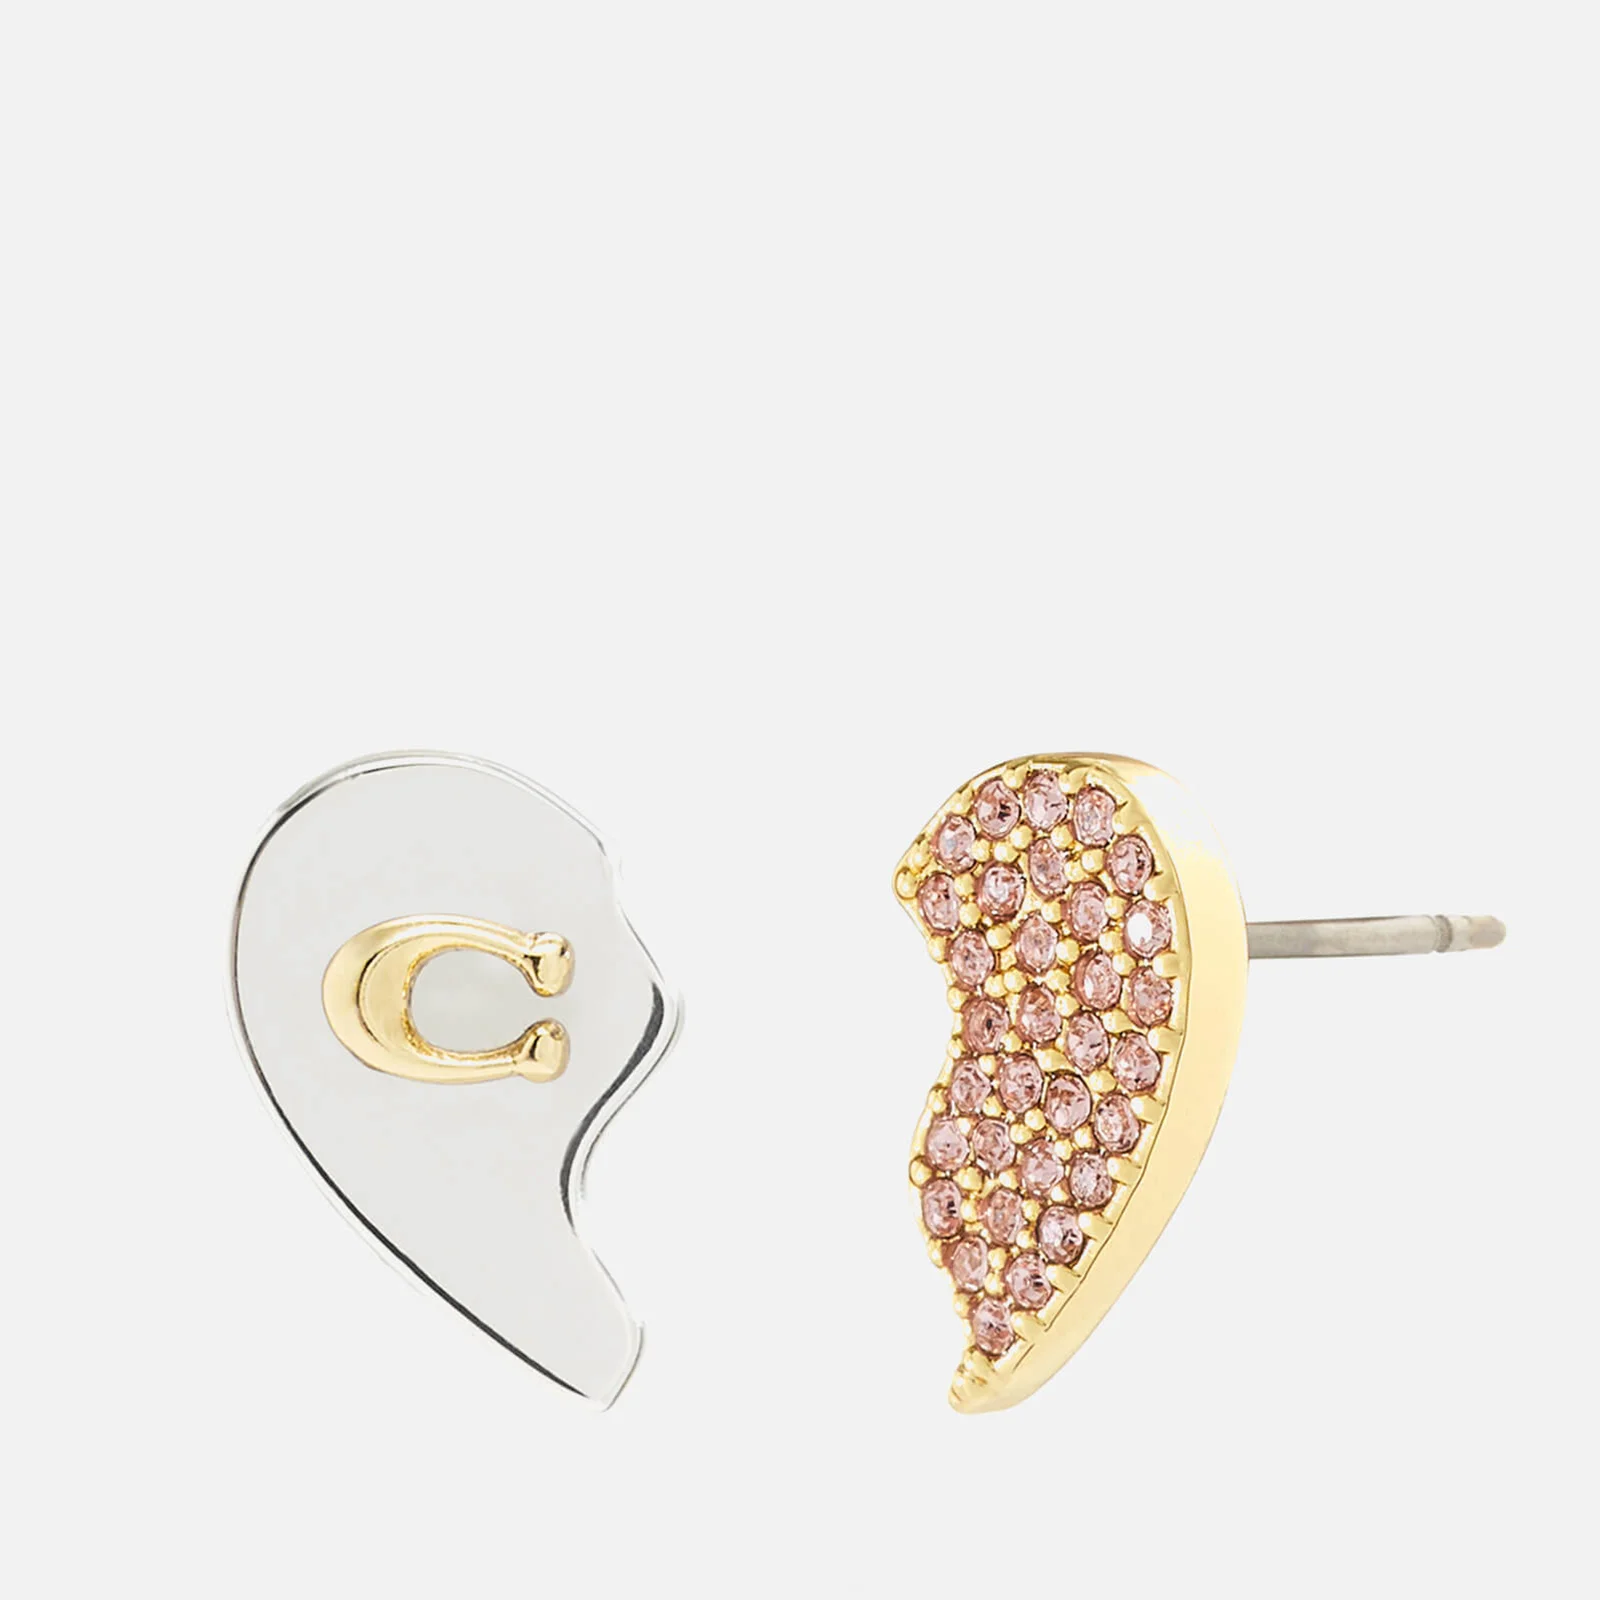 Coach Signature Mismatched Heart Gold and Silver-Tone Earrings Image 1